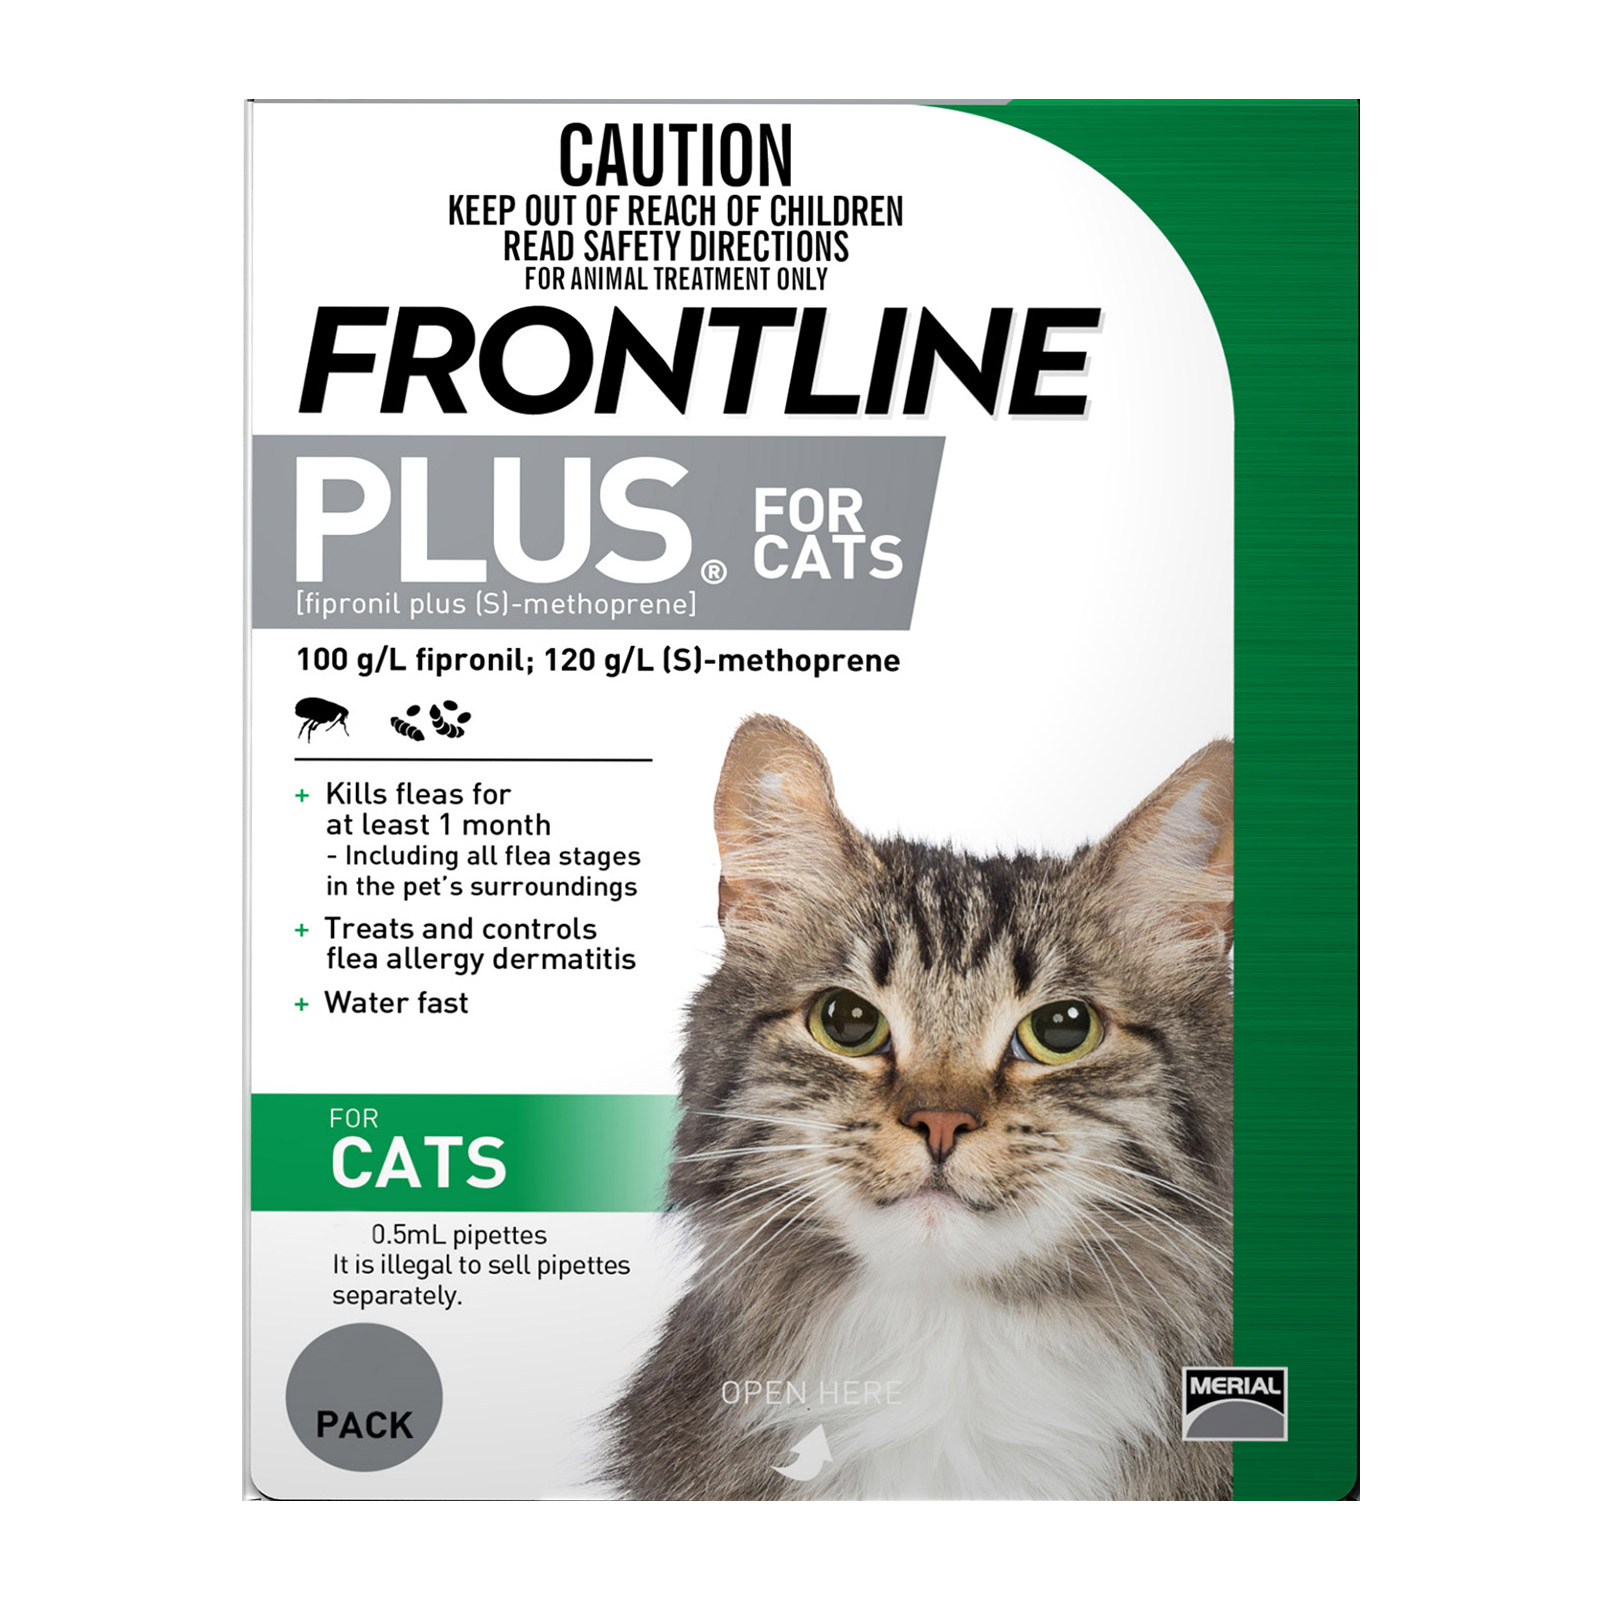 Frontline Plus For Cats Best Price 12 Pack CatWalls